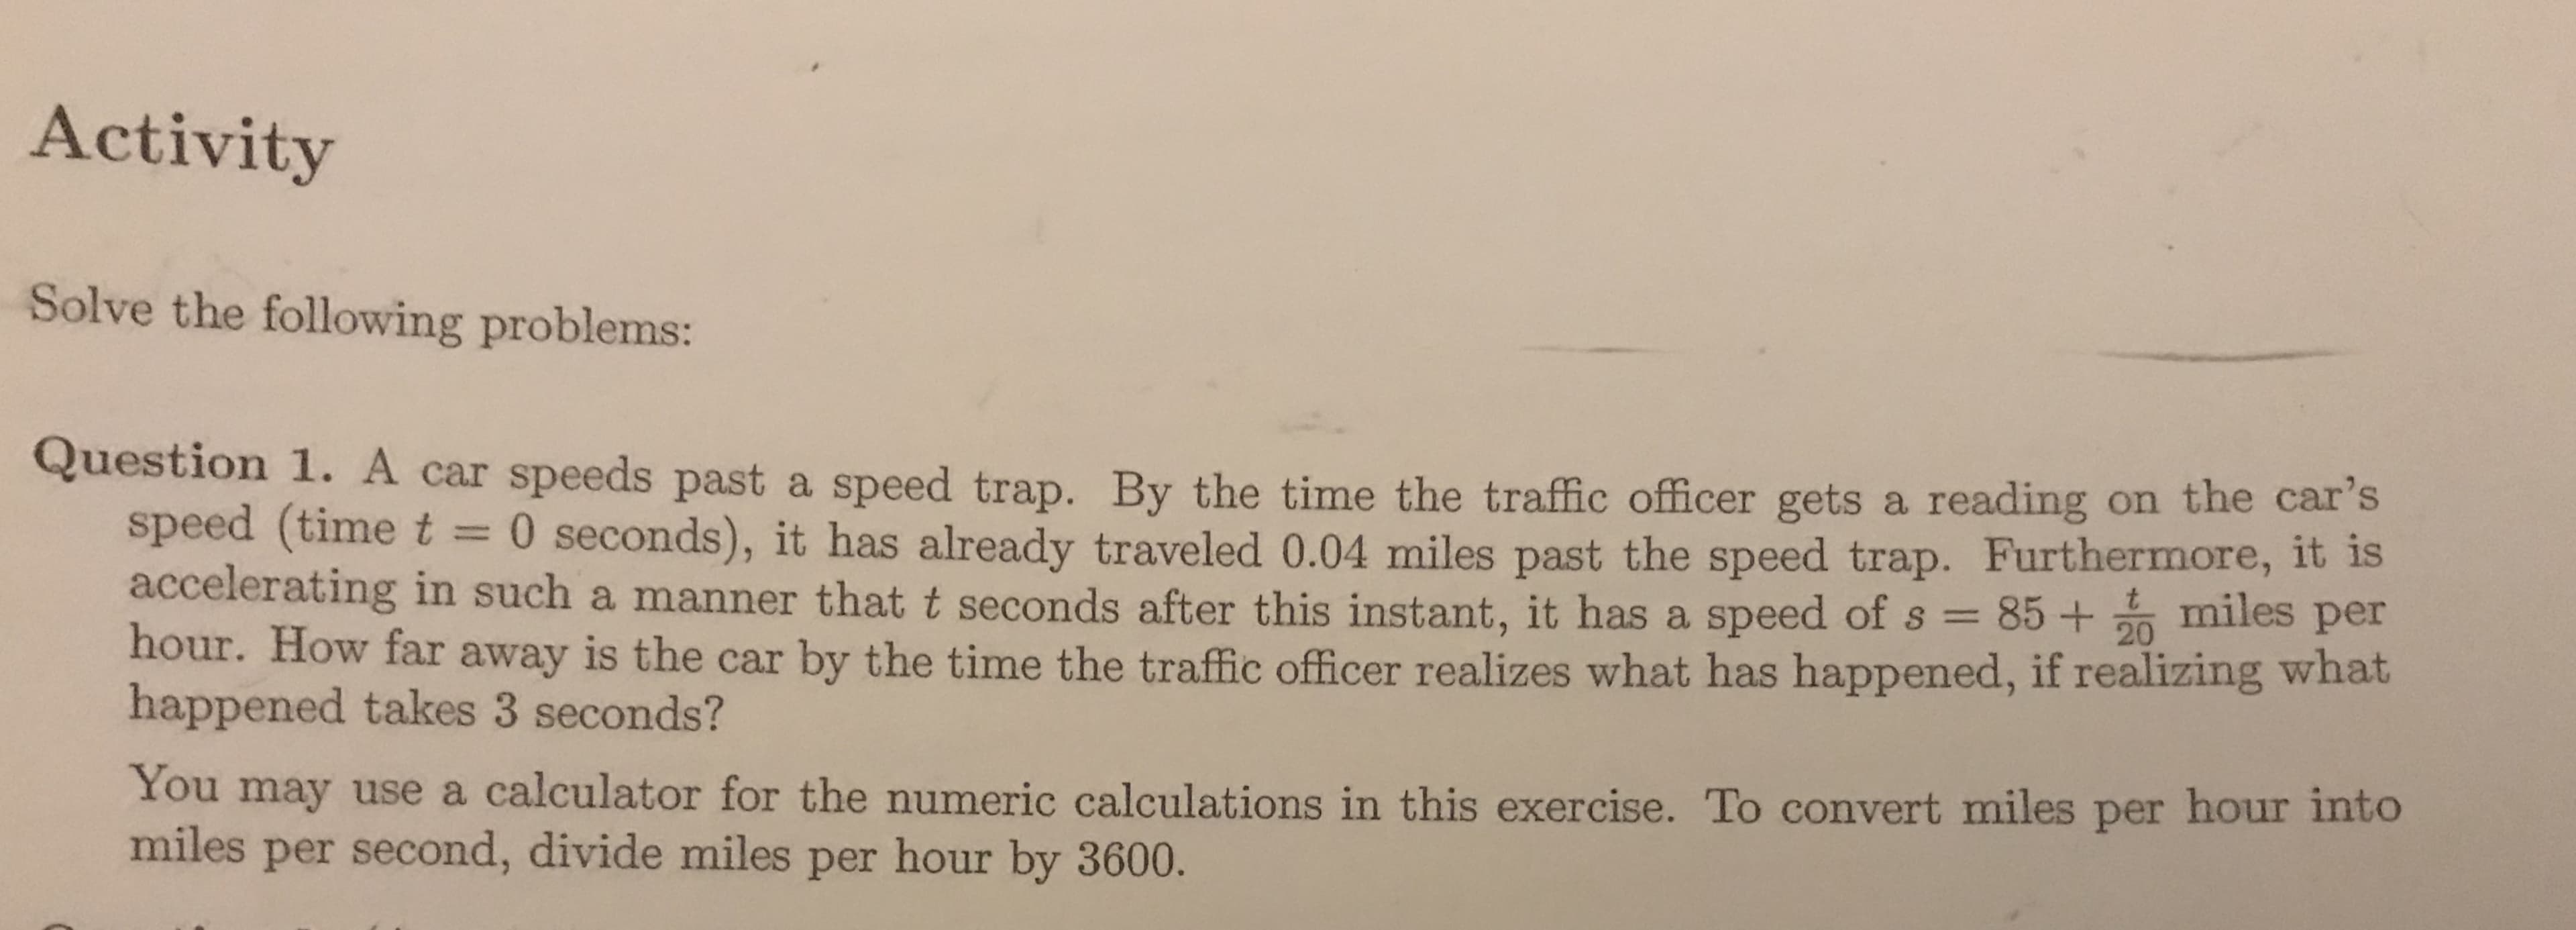 Activity
Solve the following problems:
Question 1. A car speeds past a speed trap. By the time the traffic officer gets a reading on the car's
speed (time t 0 seconds), it has already traveled 0.04 miles past the speed trap. Furthermore, it is
accelerating in such a manner that t seconds after this instant, it has a speed of s 852 miles per
hour. How far away is the car by the time the traffic officer realizes what has happened, if realizing what
happened takes 3 seconds?
You may use a calculator for the numeric calculations in this exercise. To convert miles per hour into
miles per second, divide miles per hour by 3600.
